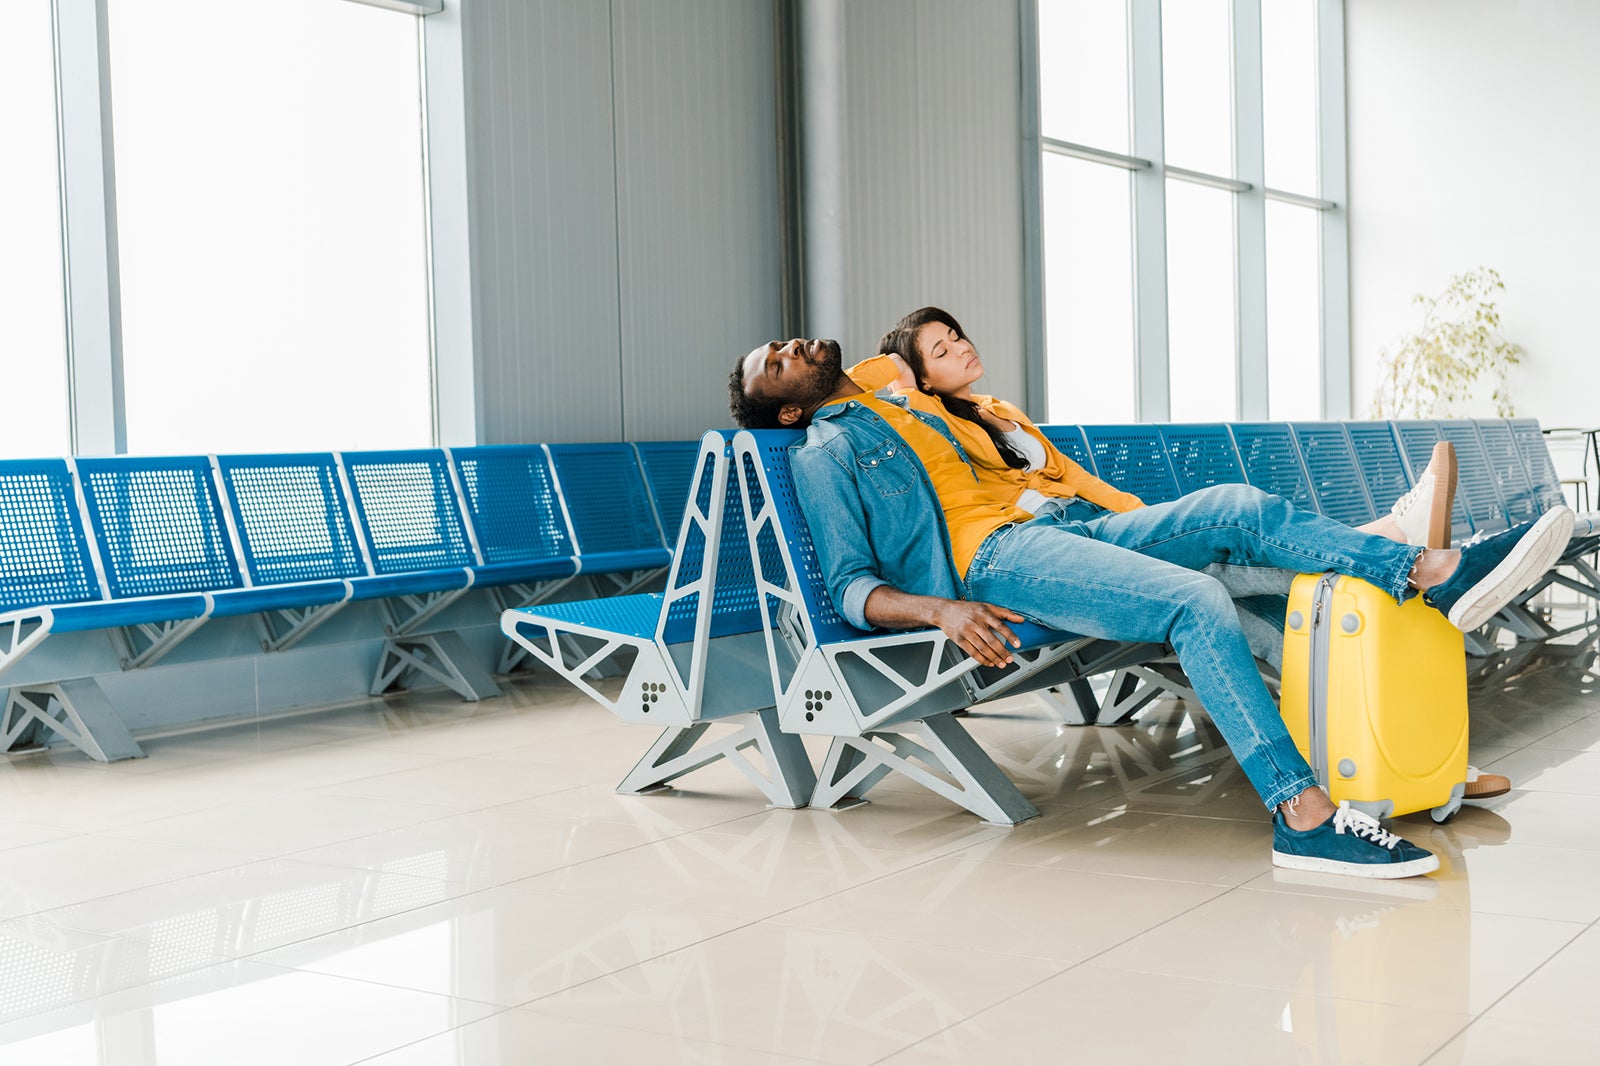 Can you sleep in airport lounges?